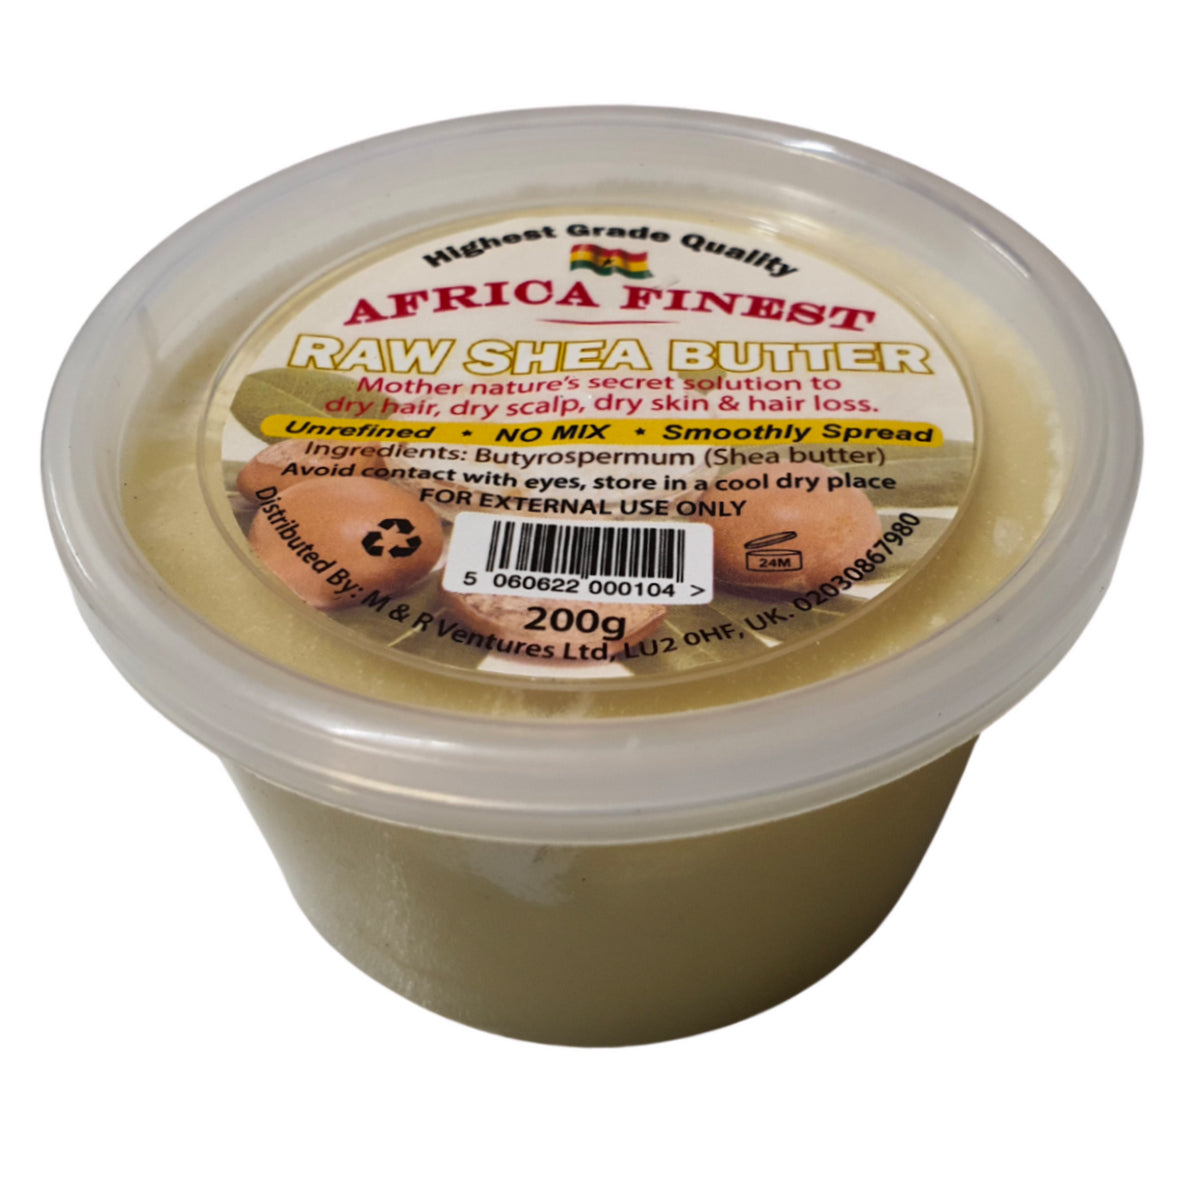 Shea Cocoa Project - Africa Finest - Pure Shea Butter (marfil)